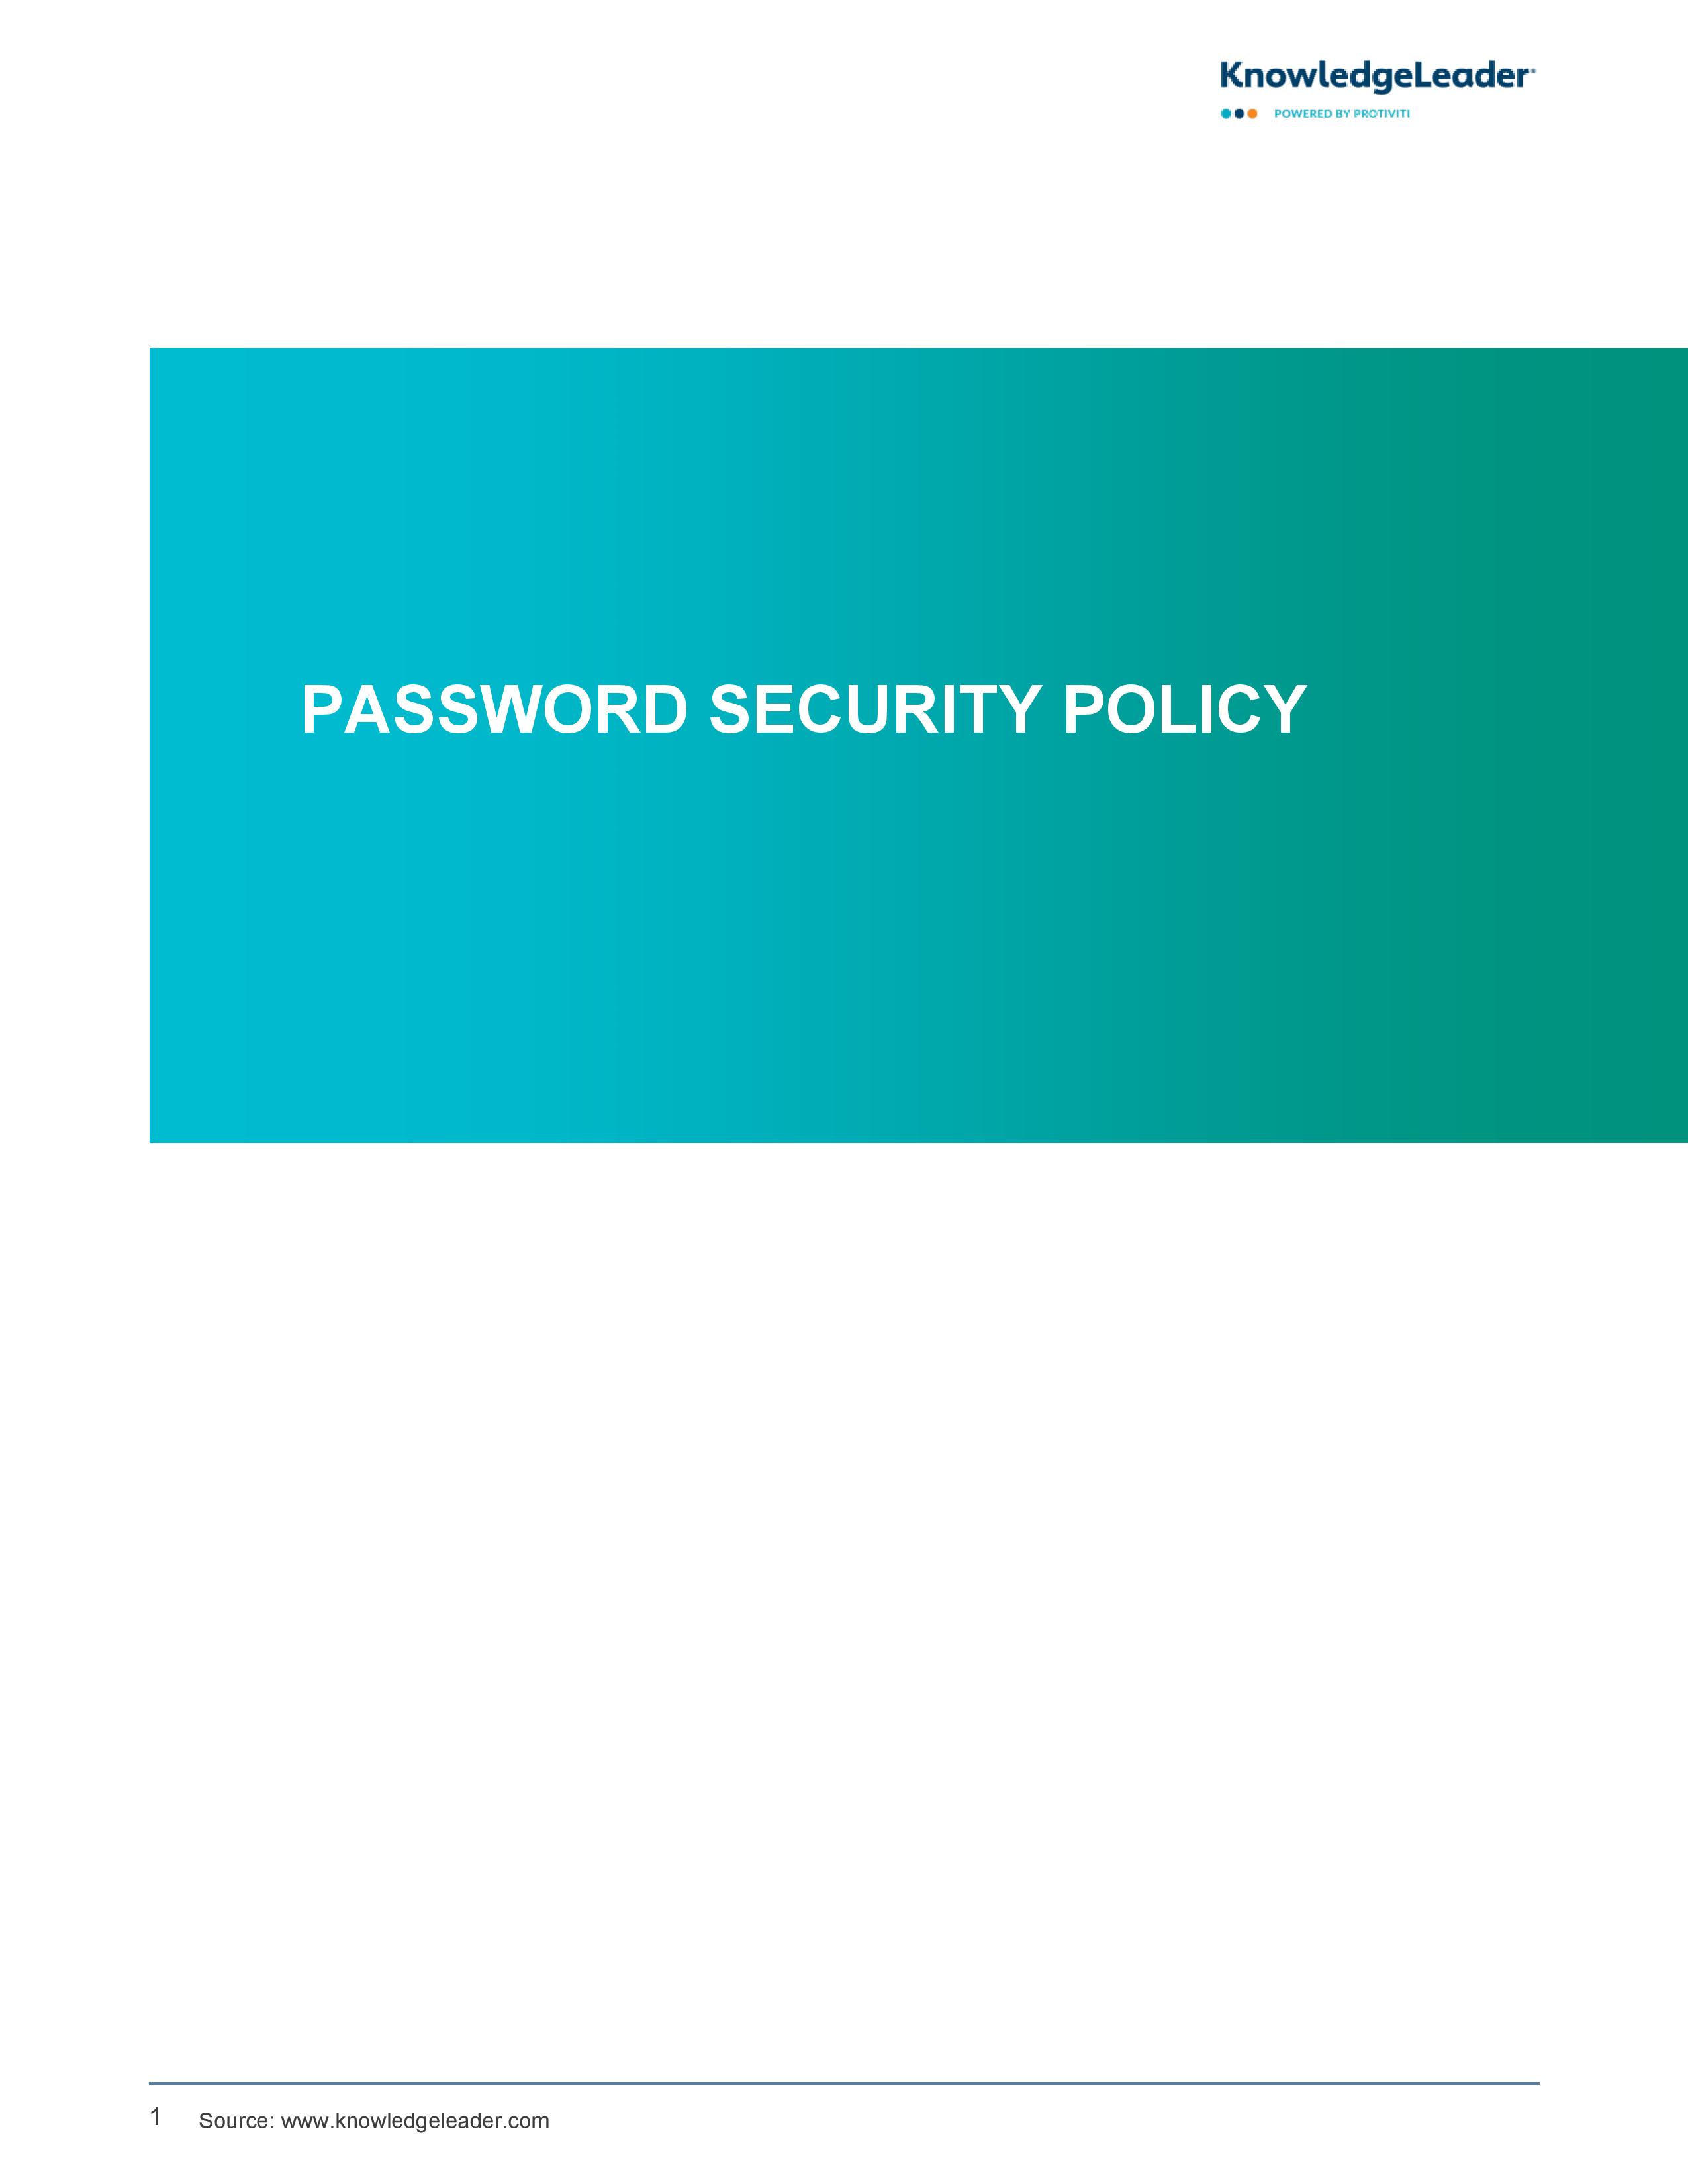 Screenshot of the first page of Password Security Policy